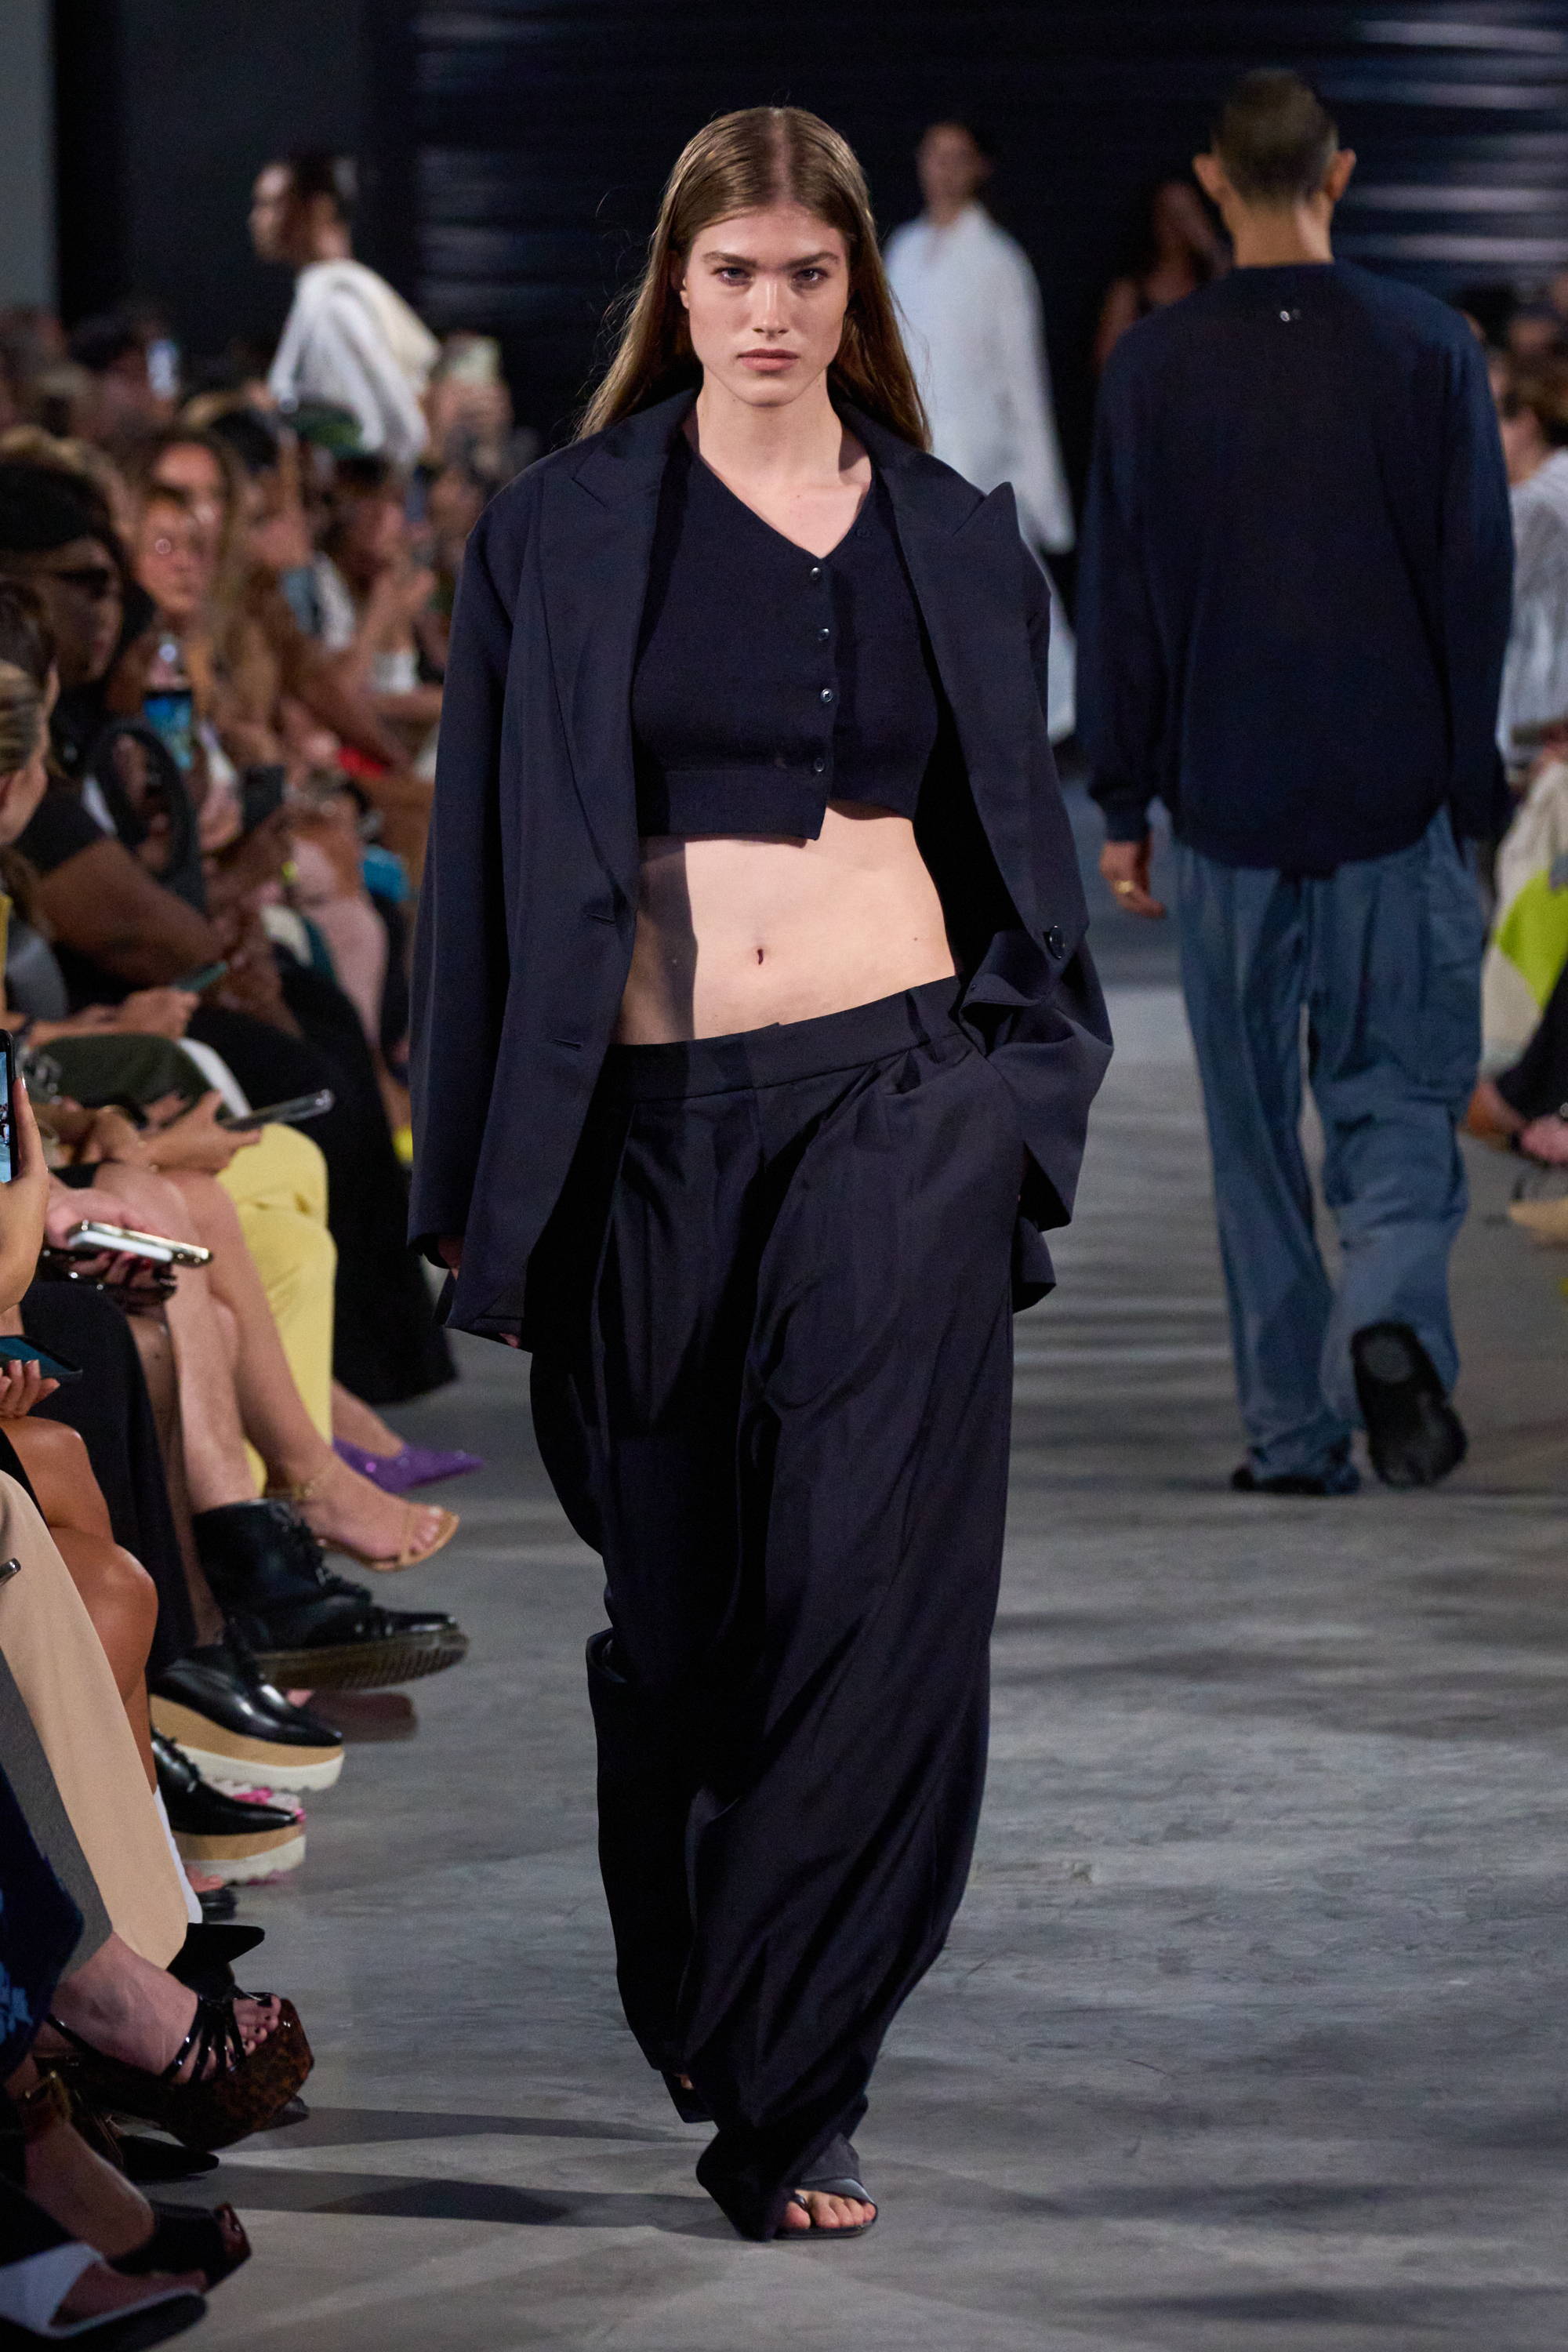 Model on a runway wearing blazer, cropped sweater, and pants